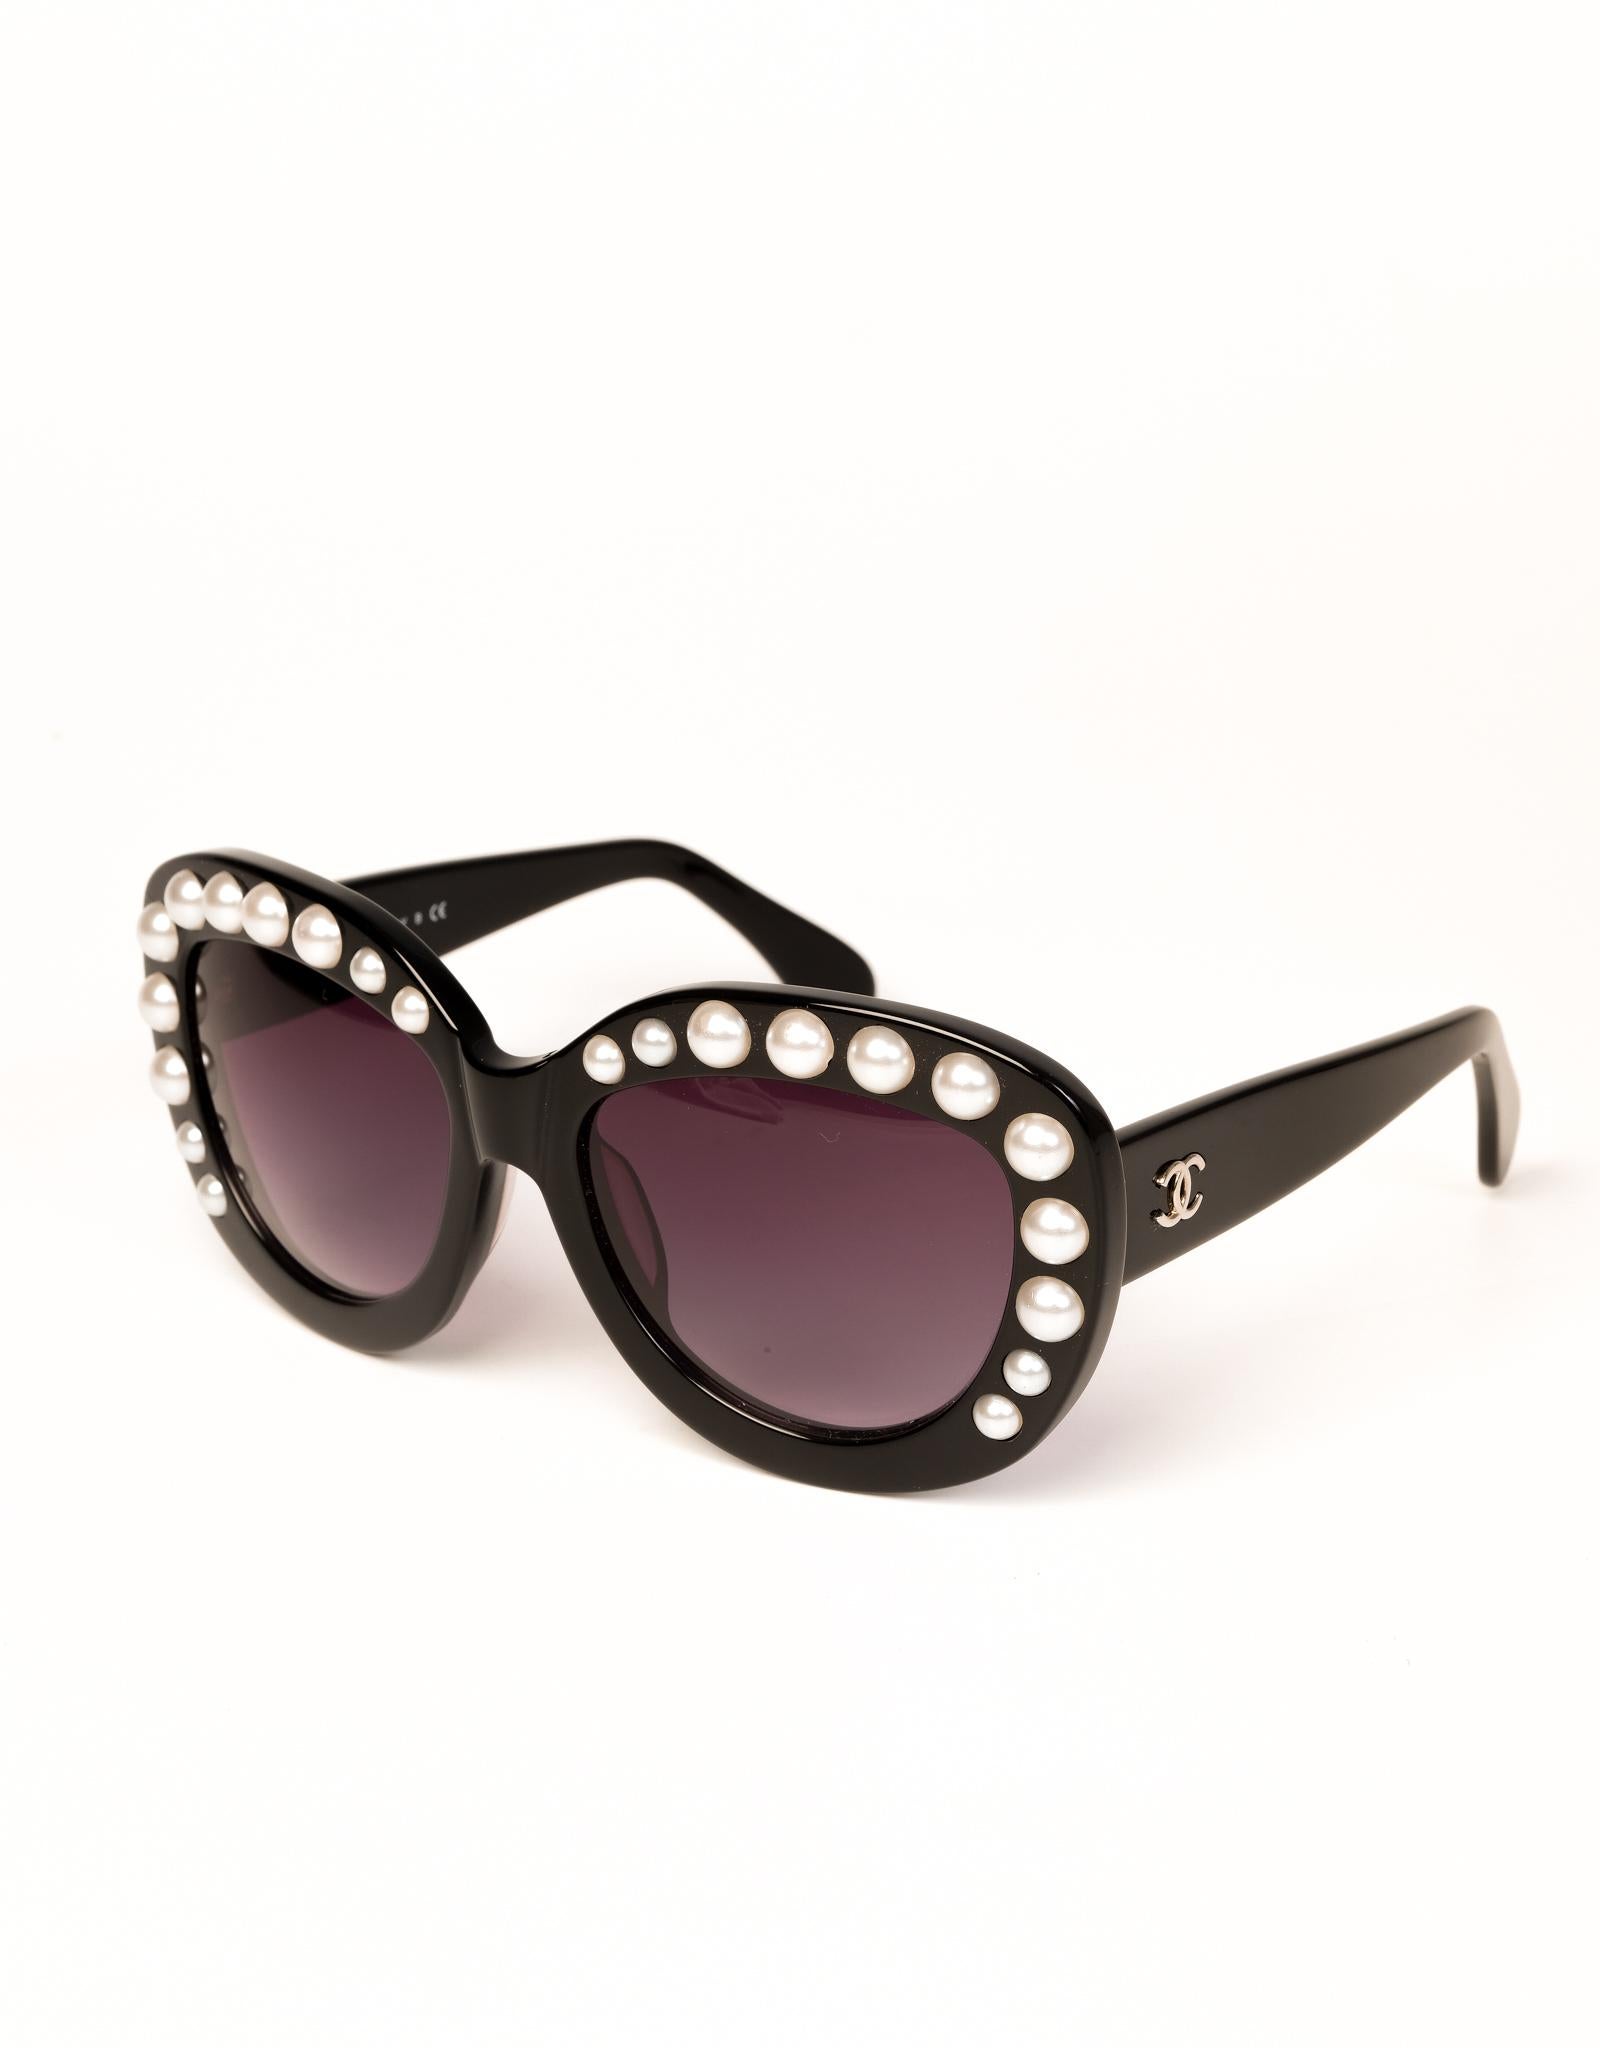 These sunglasses have a black frame with pearls along the top & sides with black lenses. The arms feature a small CC on the sides.

COLOR: Black
ITEM CODE: CH9045H c.901 
SIZE STAMP: 57☐19 135 3N
FRAME MATERIAL: Acetate